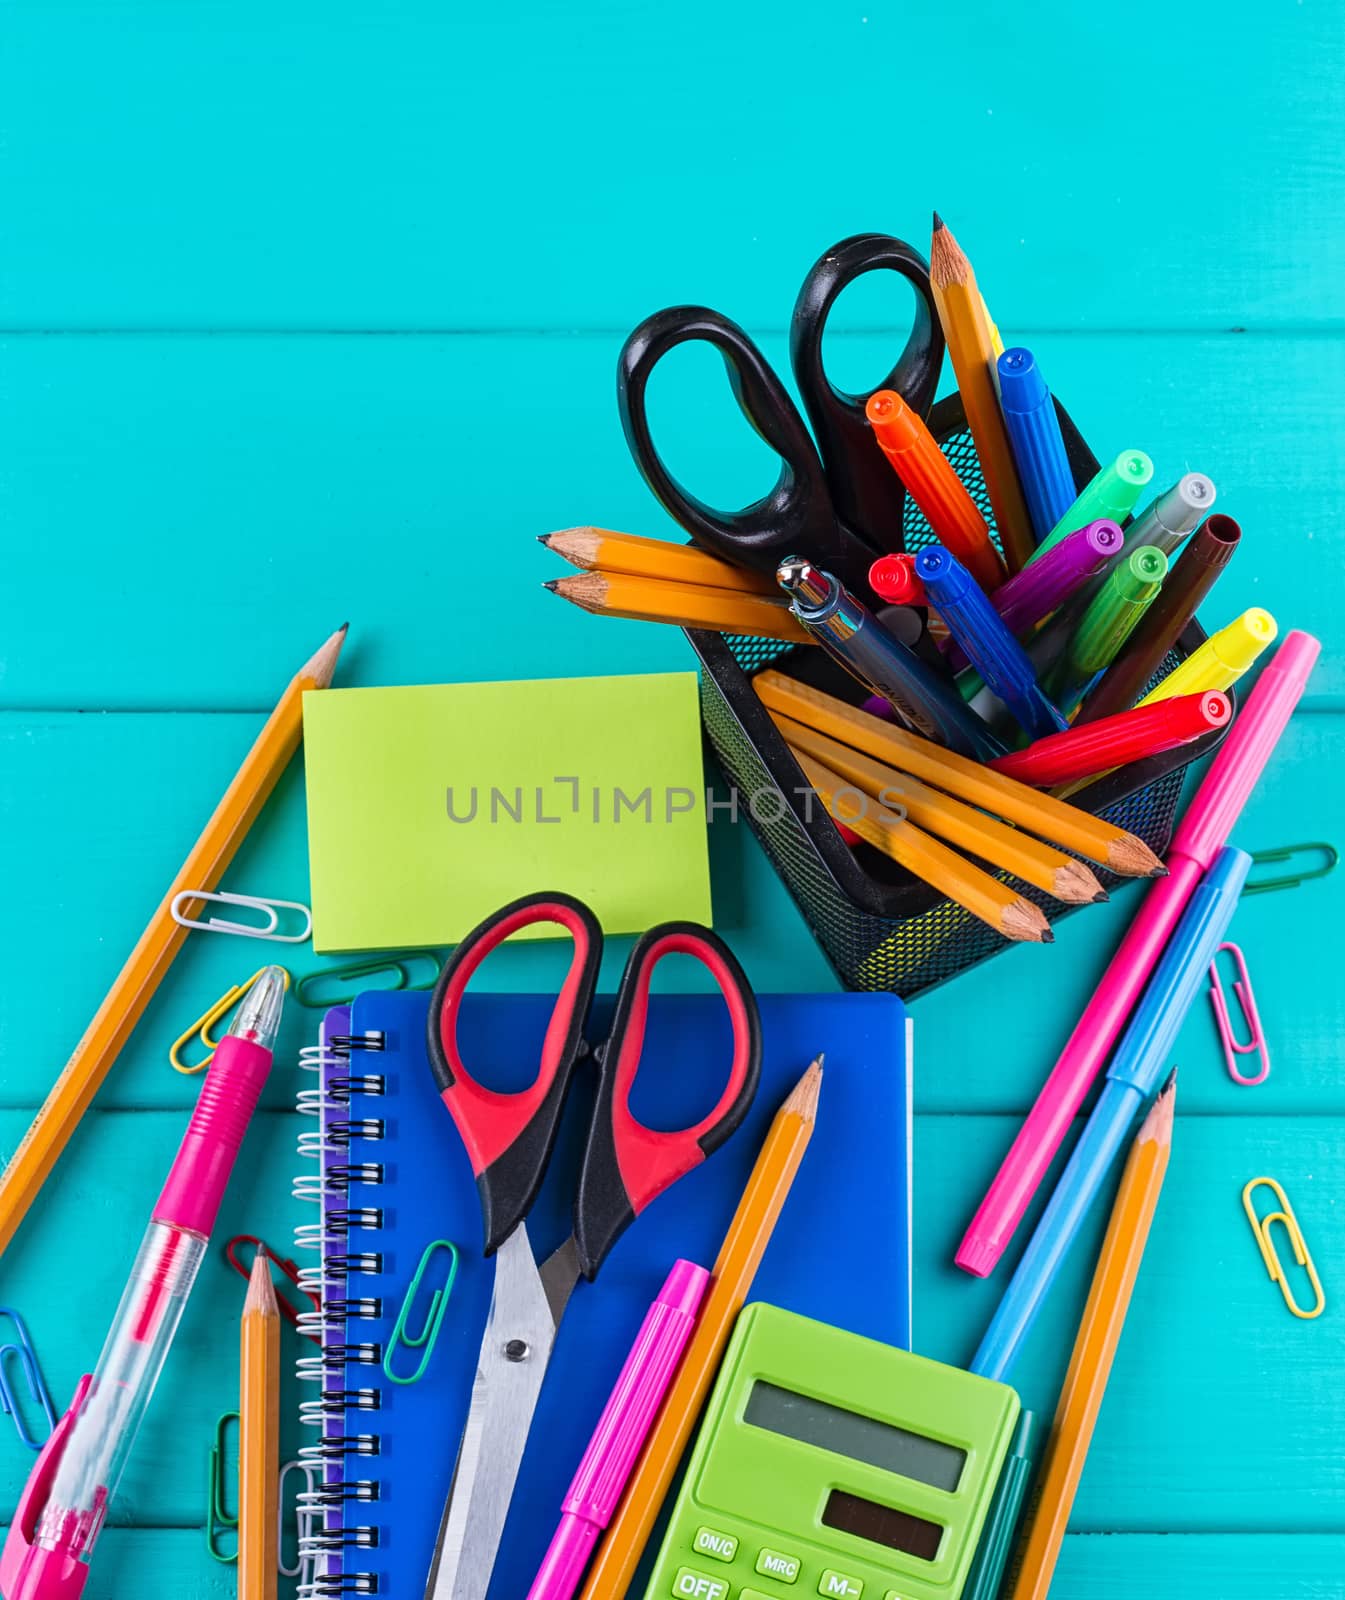 school and office supplies. school background. colored pencils, pen, pains, paper for school and student education on blue wood background. top view